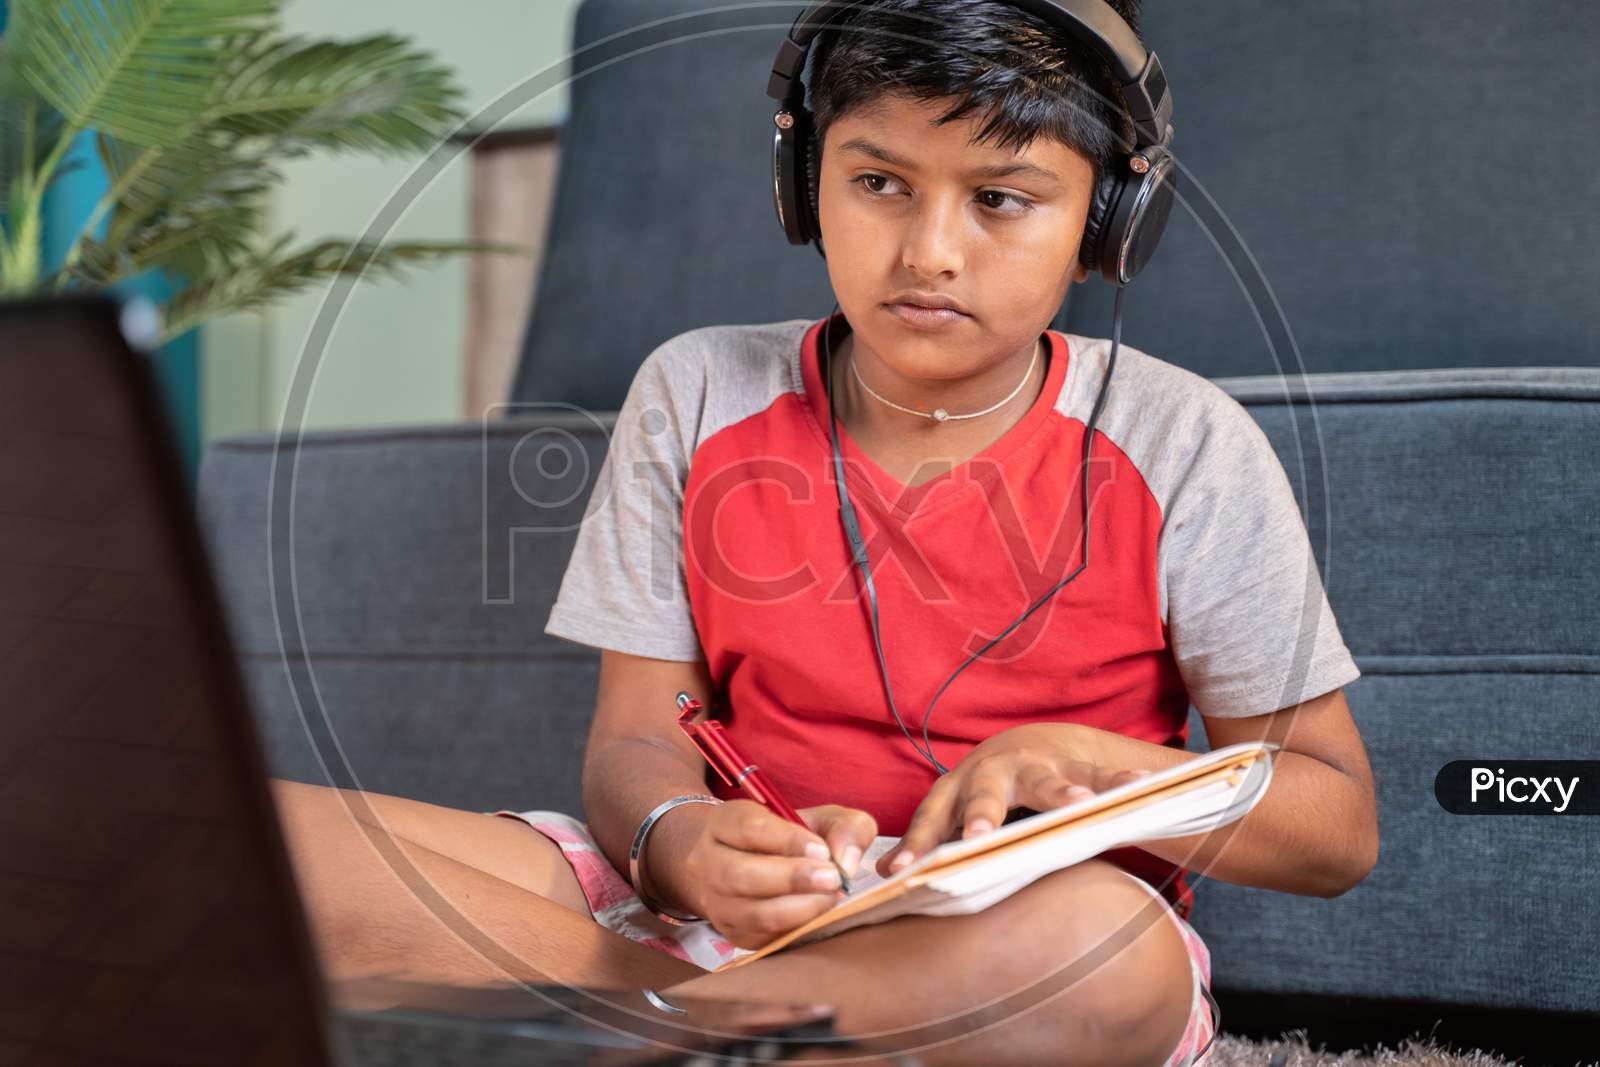 Serious Kid With Headphone Noting Down To Book By Seeing Laptop During Online Class At Home - Concept Of Online Classroom, Online Education, Technology And Lifestyle.